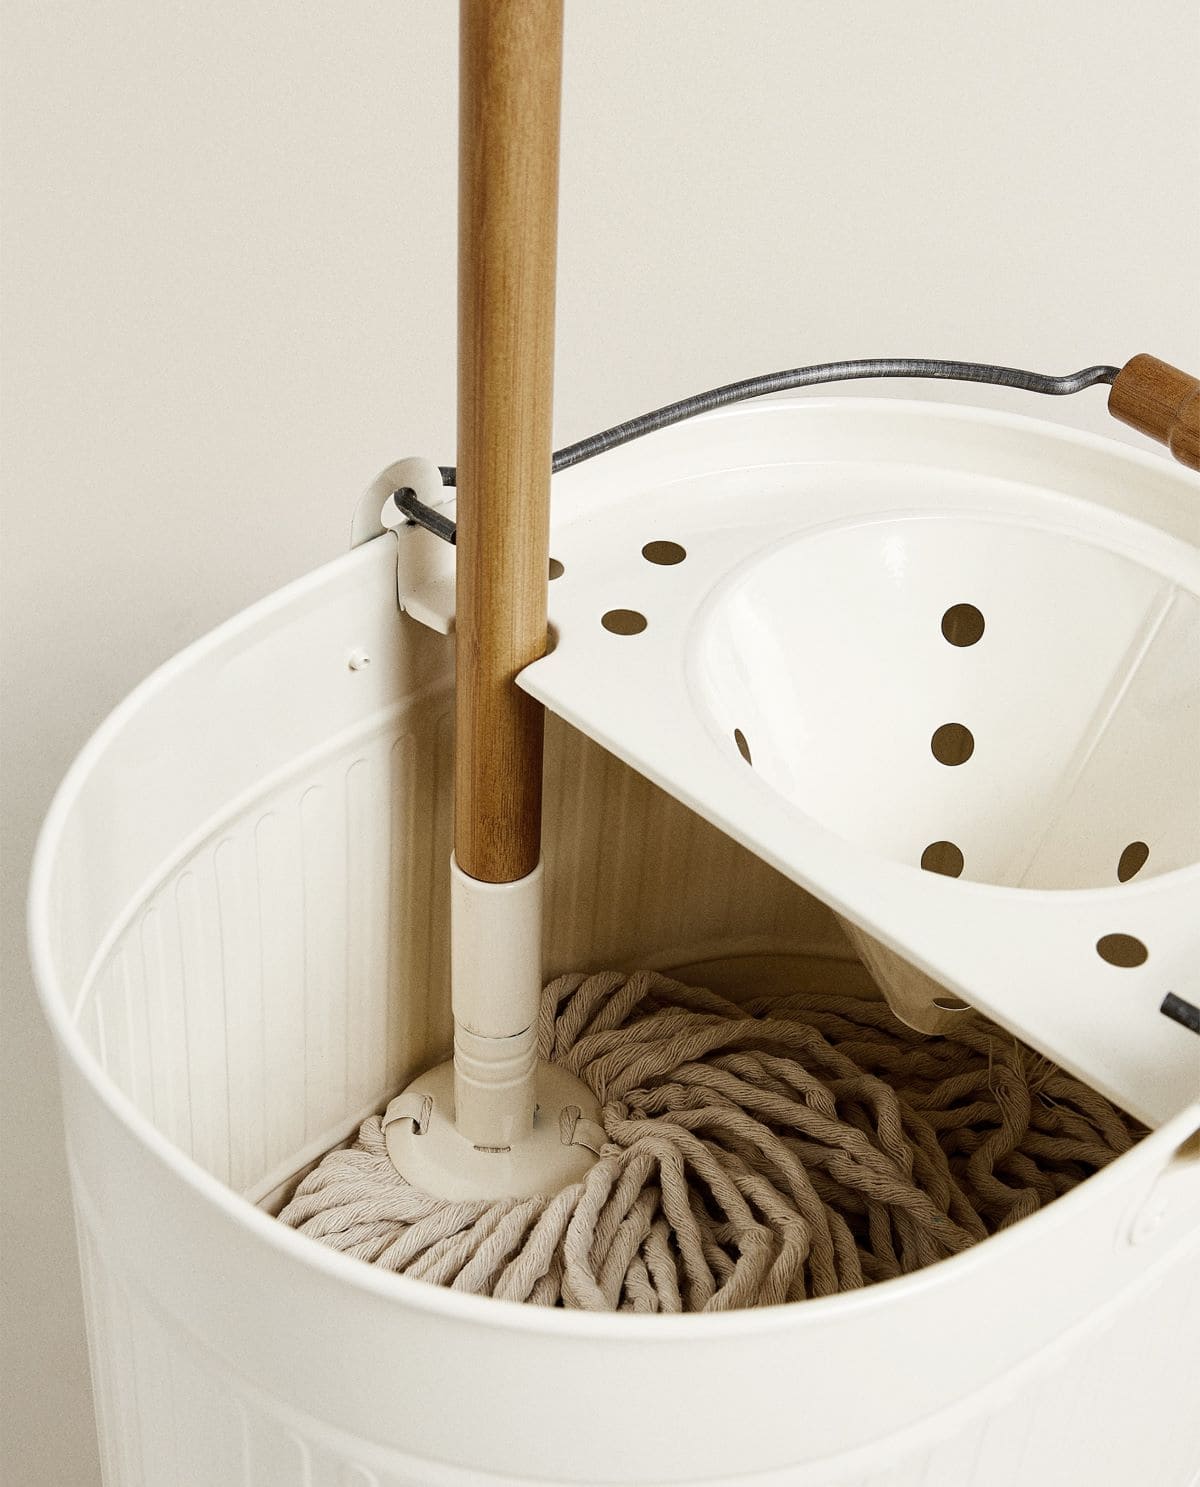 Mop and bucket set by Zara Home